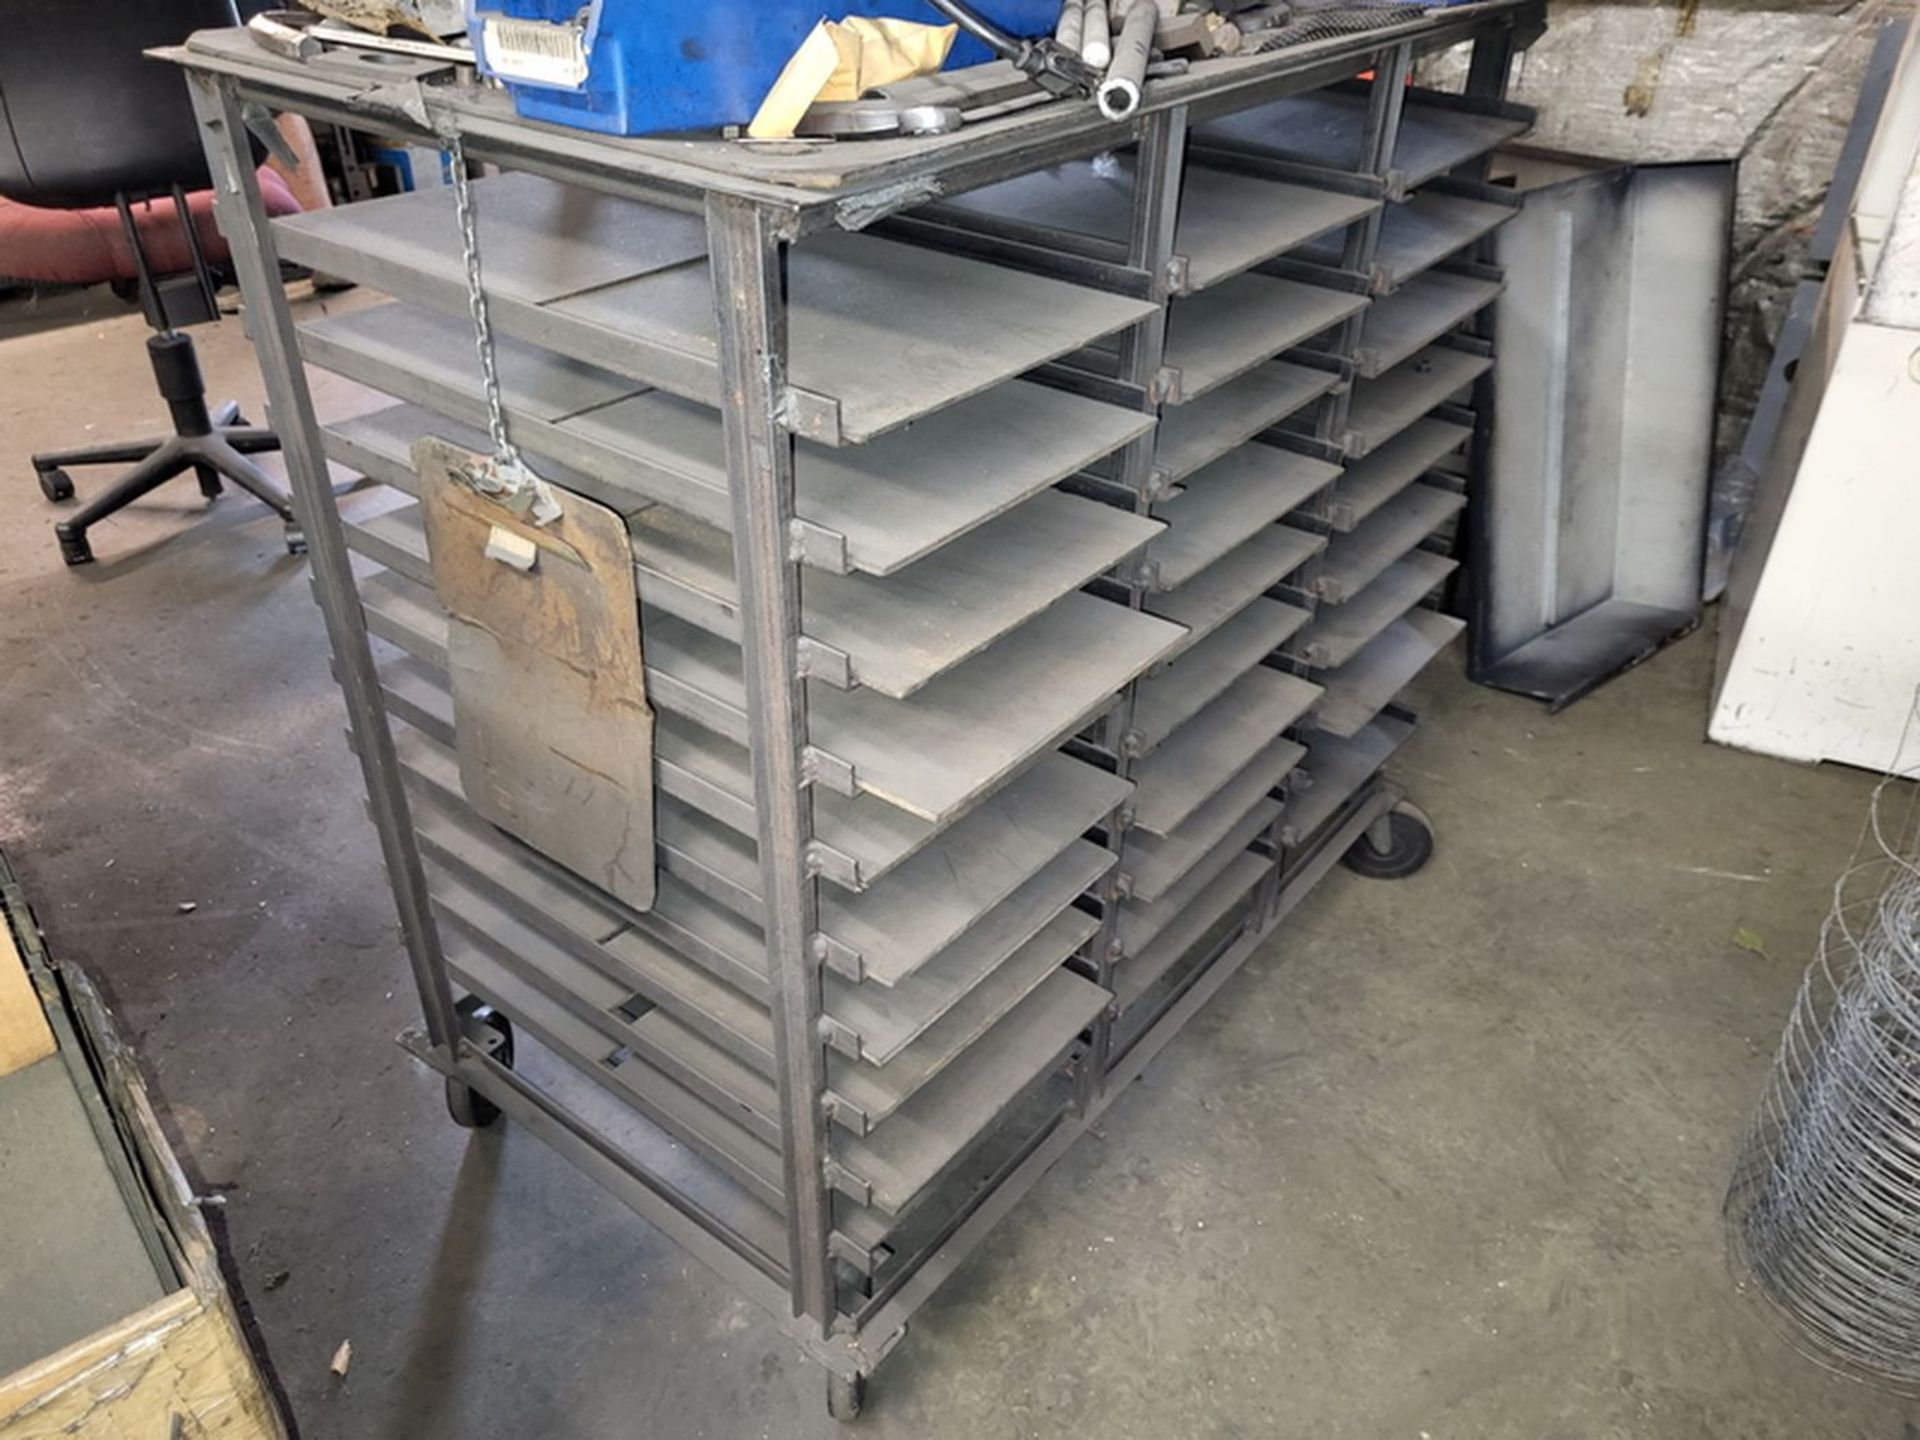 Portable Steel Parts Rack, 43 in. x 24 in. x 42 in. H - Image 2 of 2